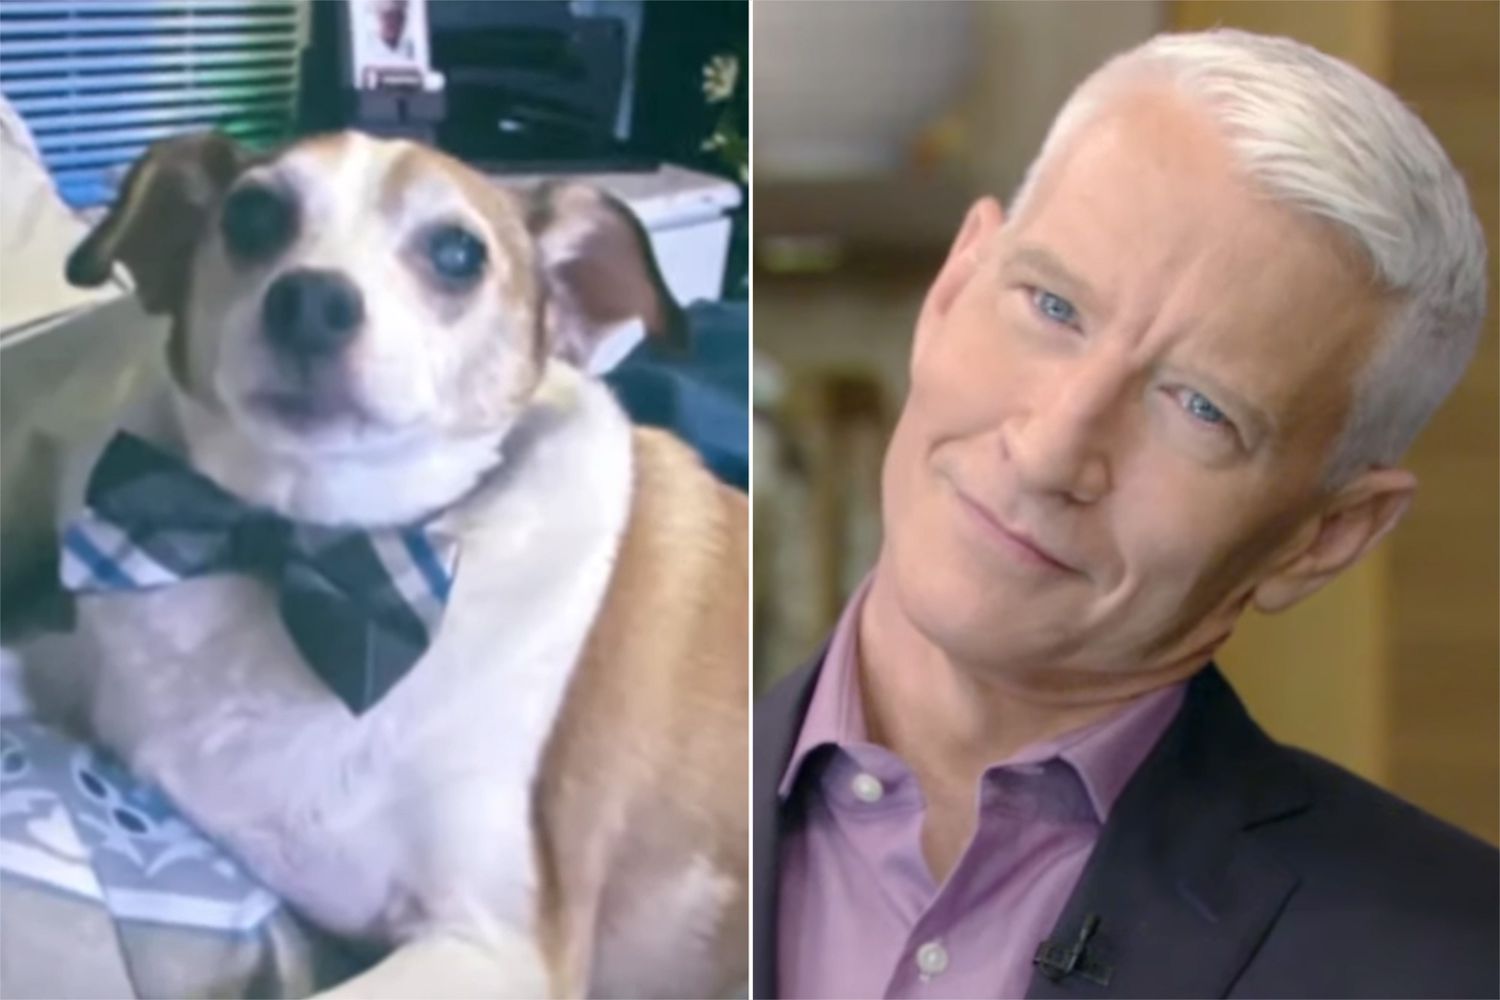 Anderson Cooper’s ‘very pale’ face compared to dog, cats on live TV